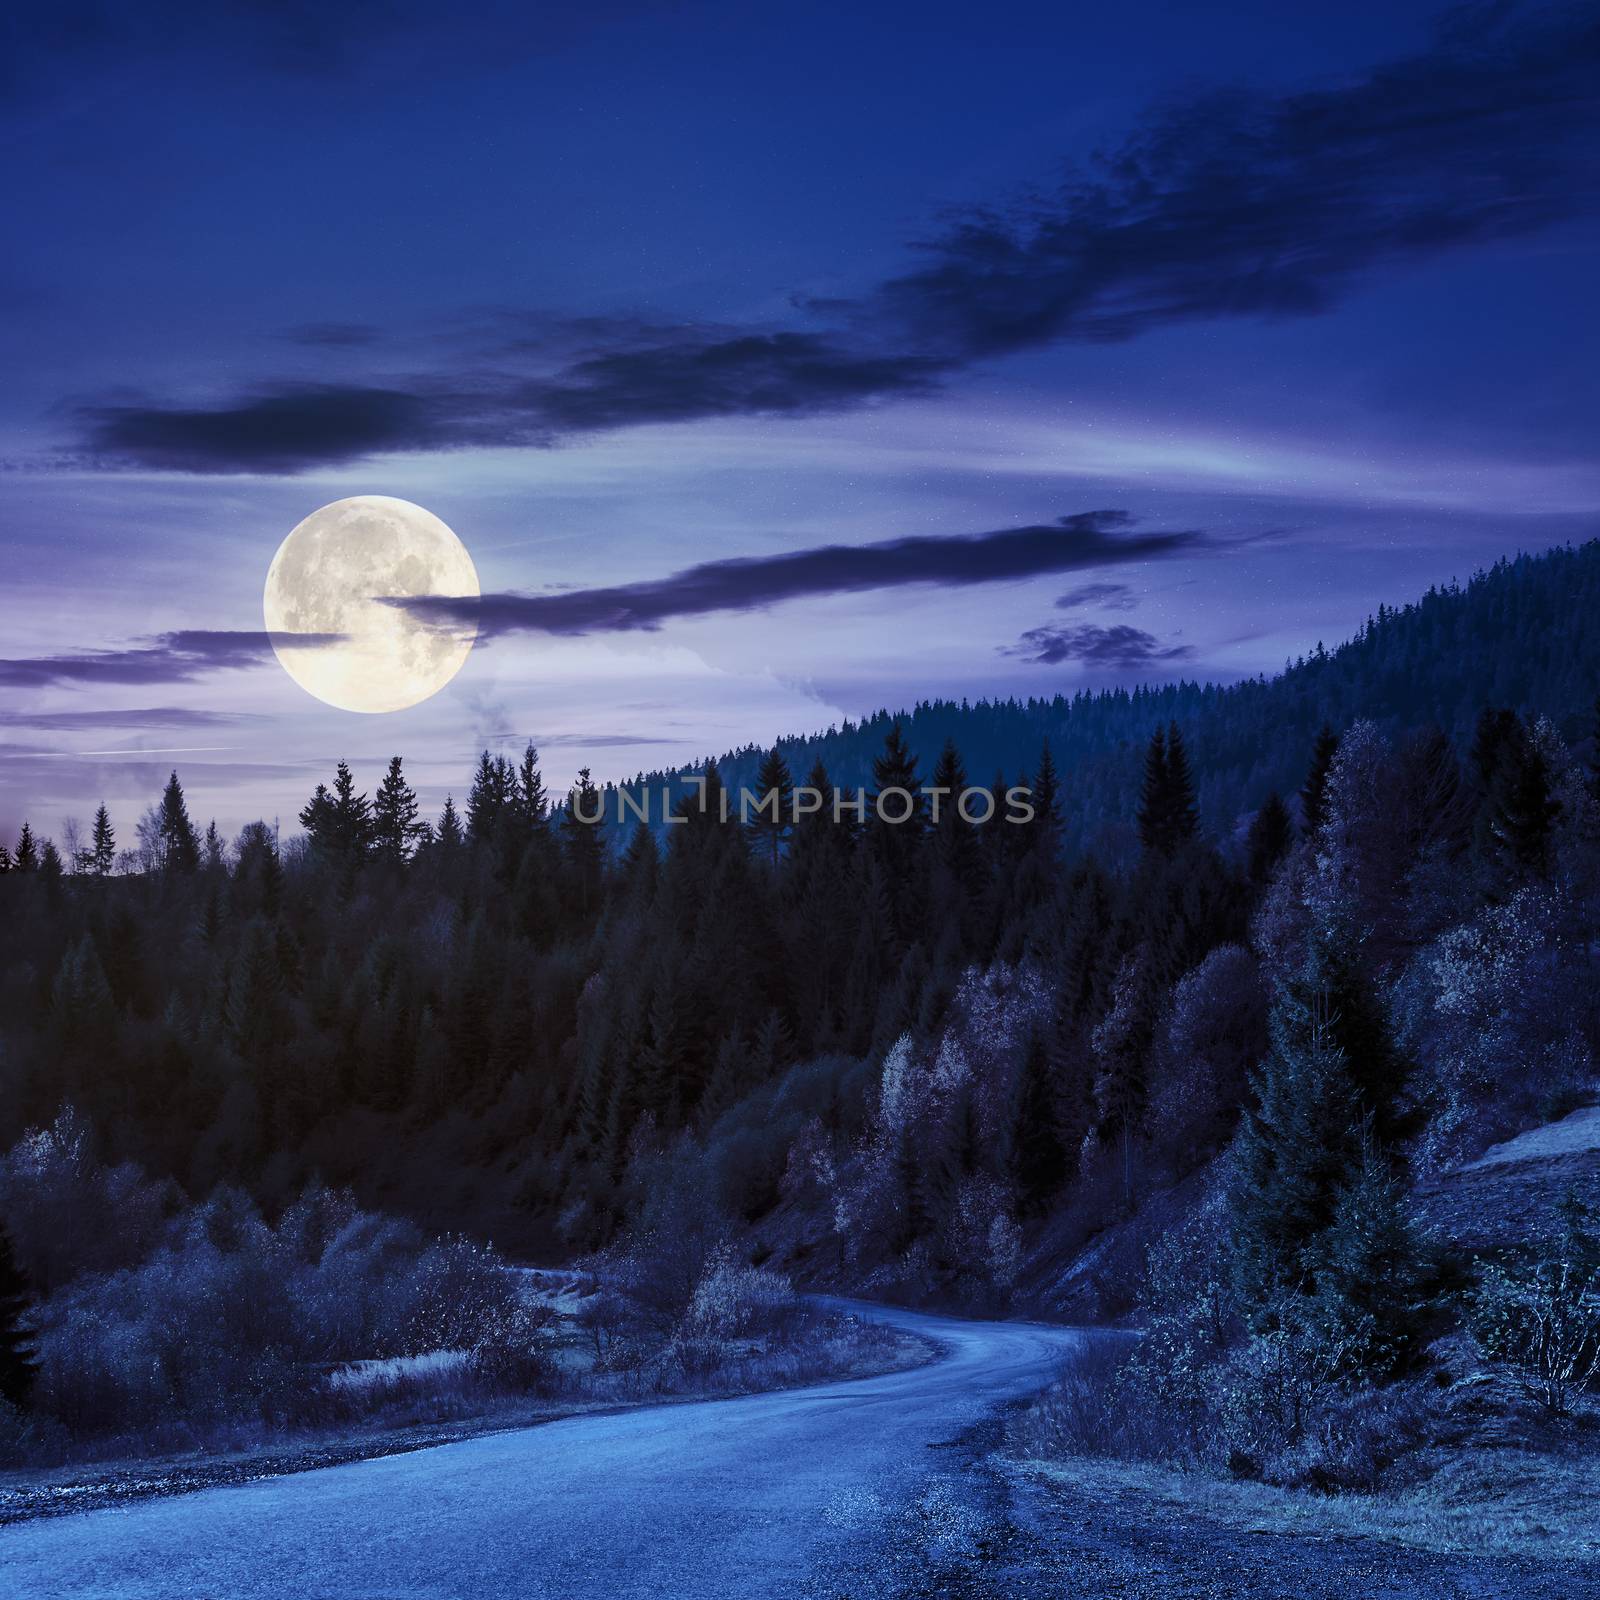 winding road to forest in mountains at night by Pellinni